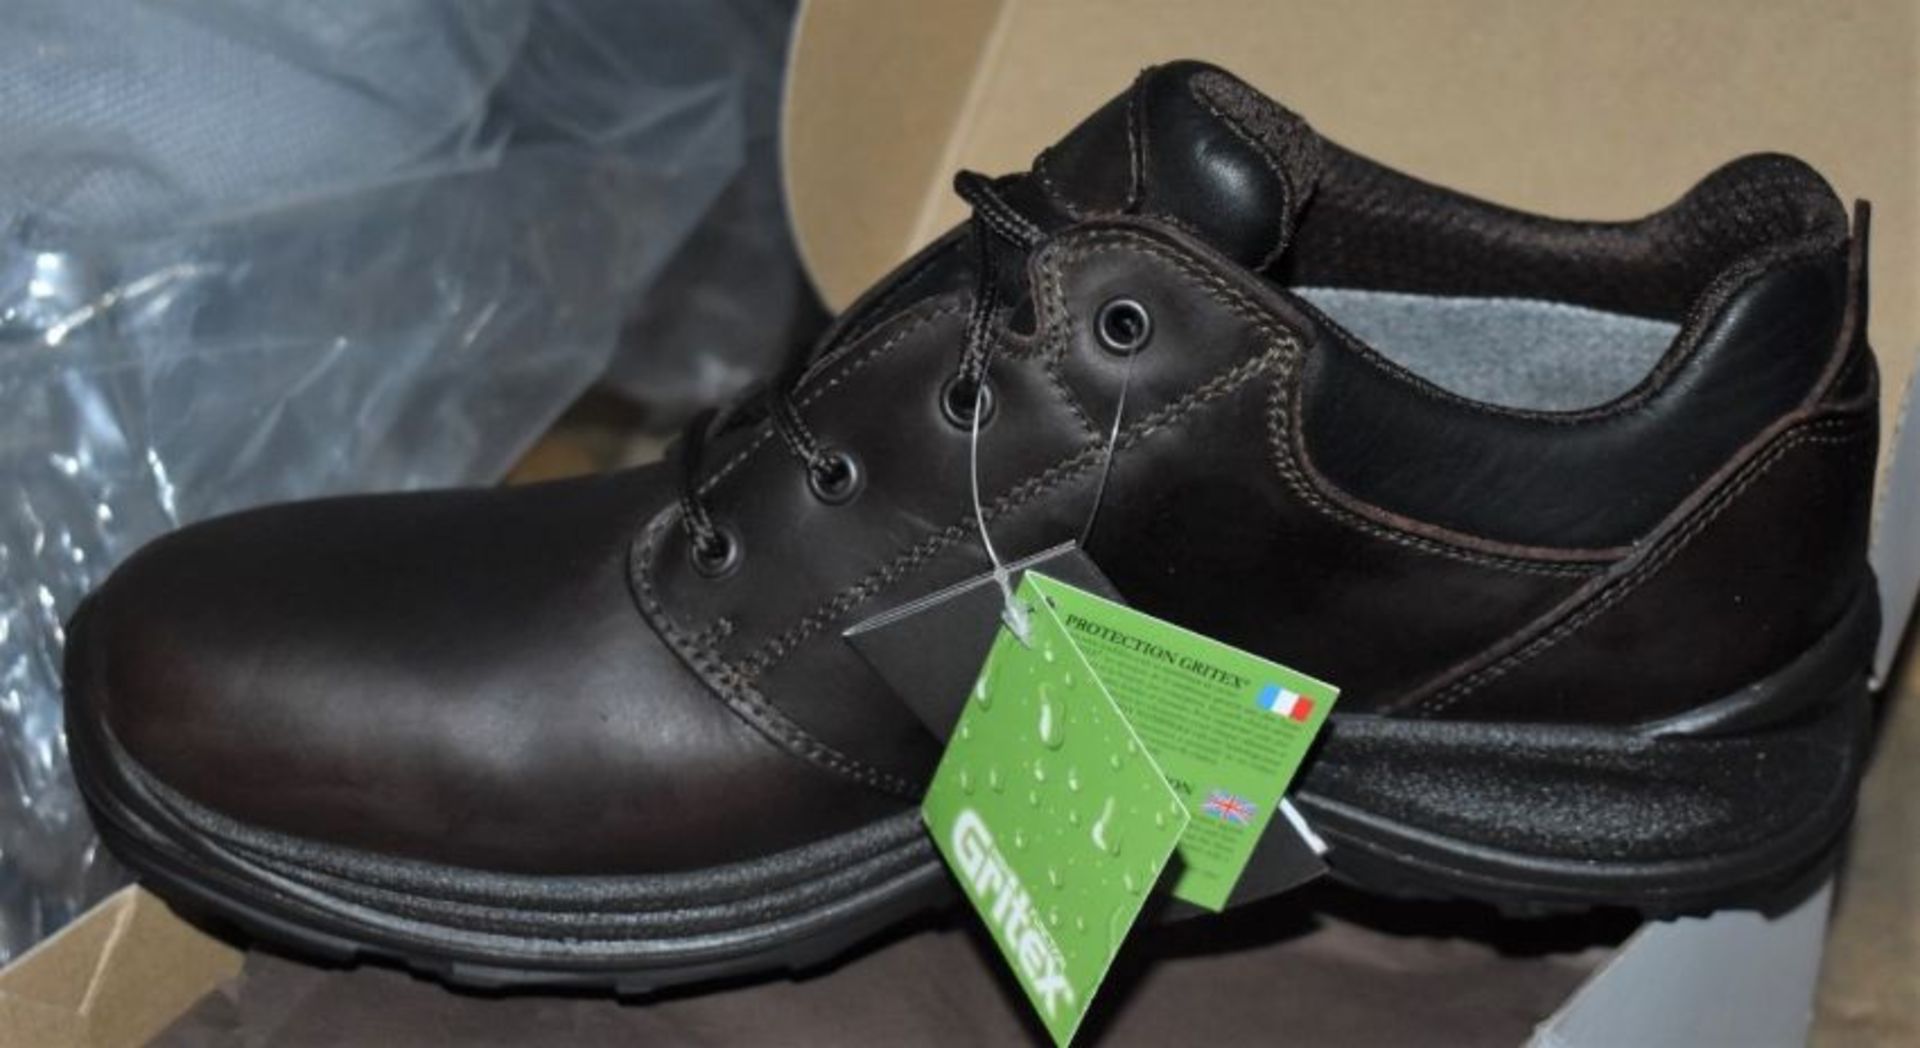 1 x Pair of Men's Grisport Brown Leather GriTex Shoes - Rogerson Footwear - Brand New and Boxed - - Image 3 of 6